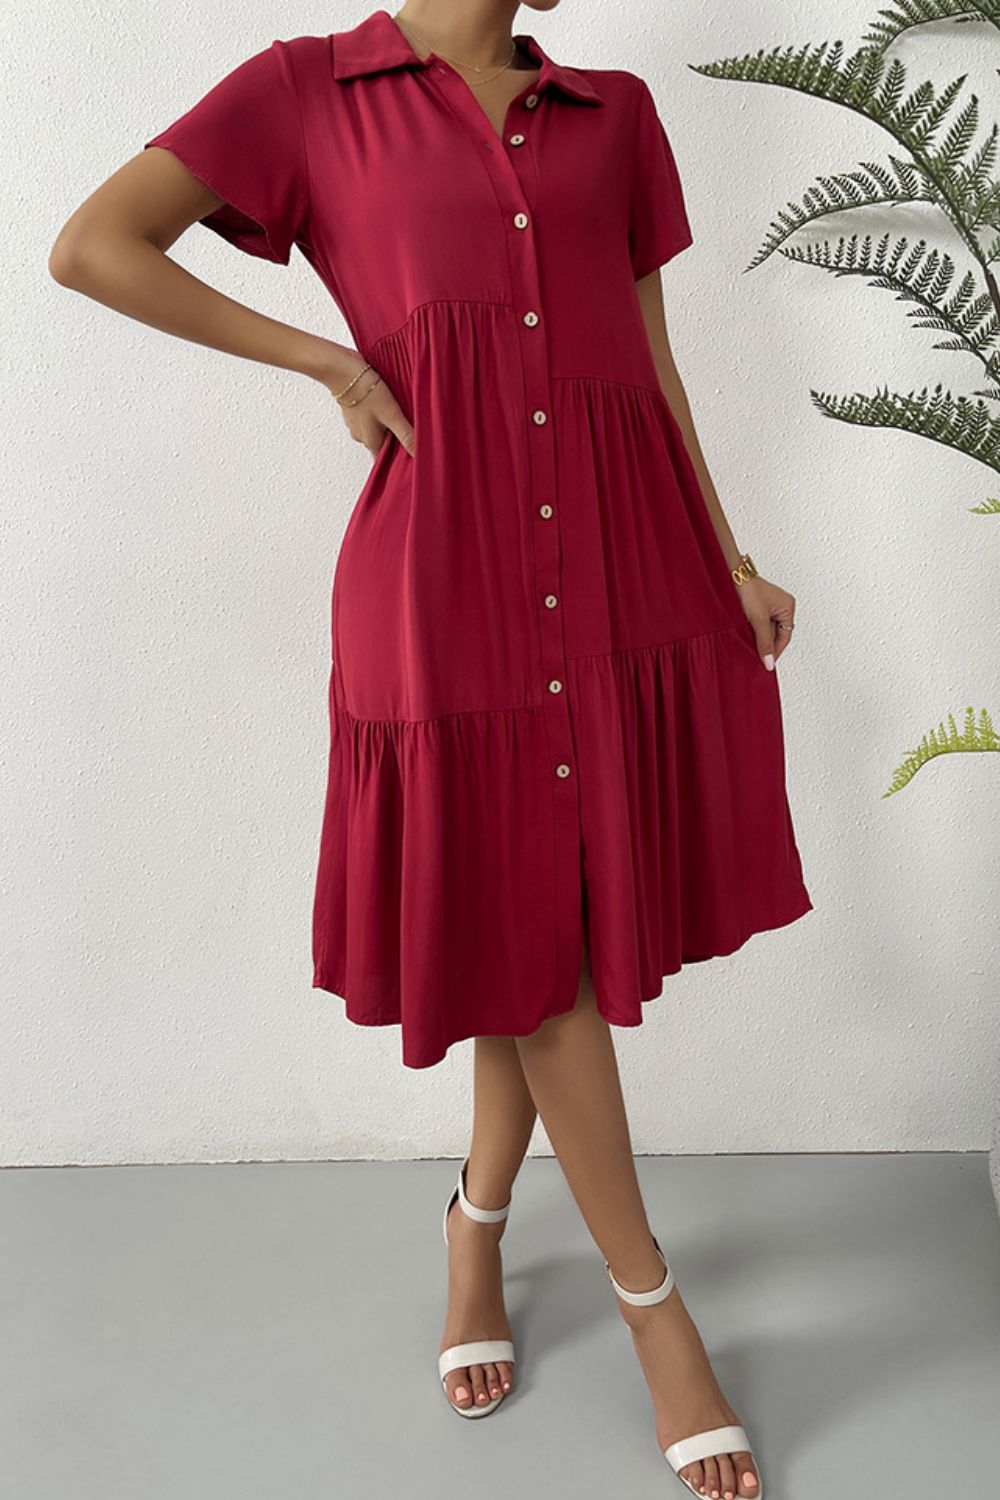 Roman Holiday Short Sleeve Button-Down Shirt Dress in Solid Wine